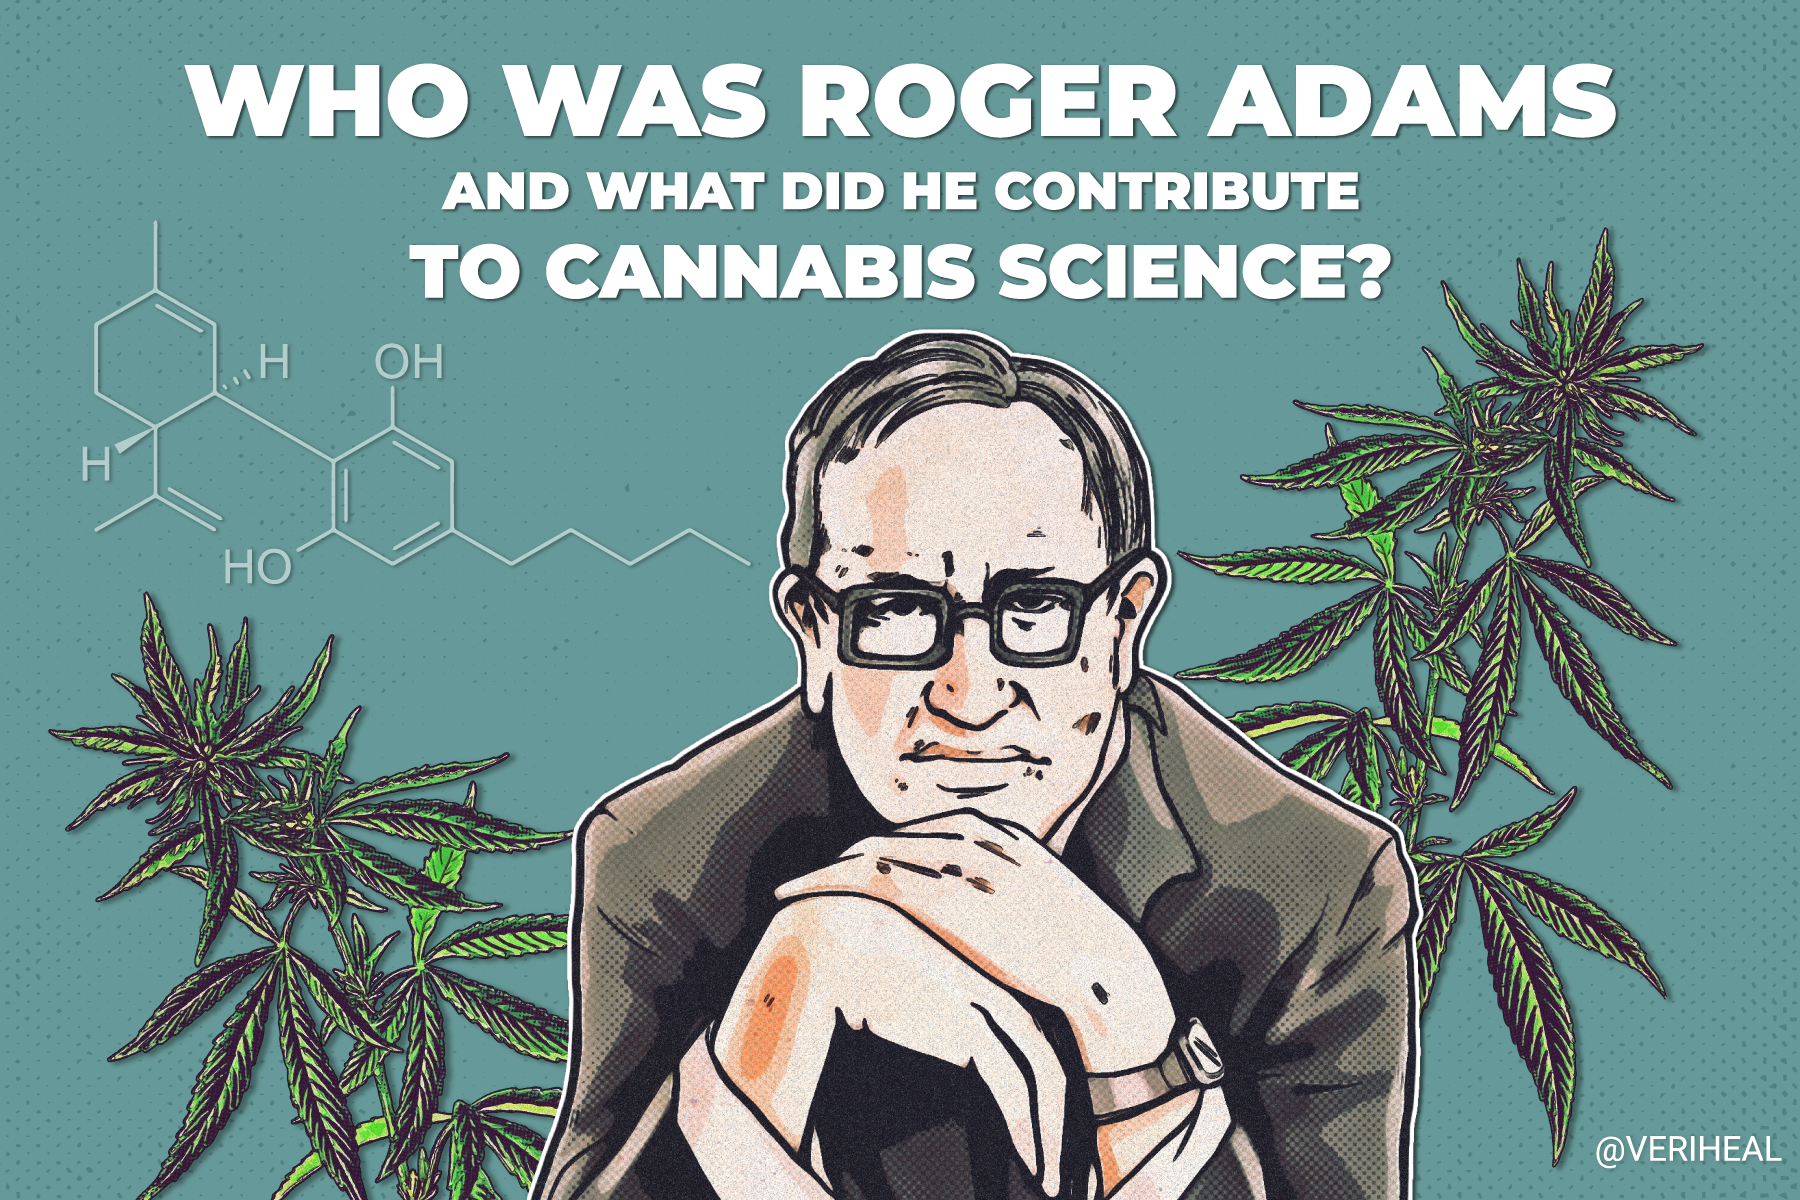 Who Was Roger Adams and What Did He Contribute to Cannabis Science?